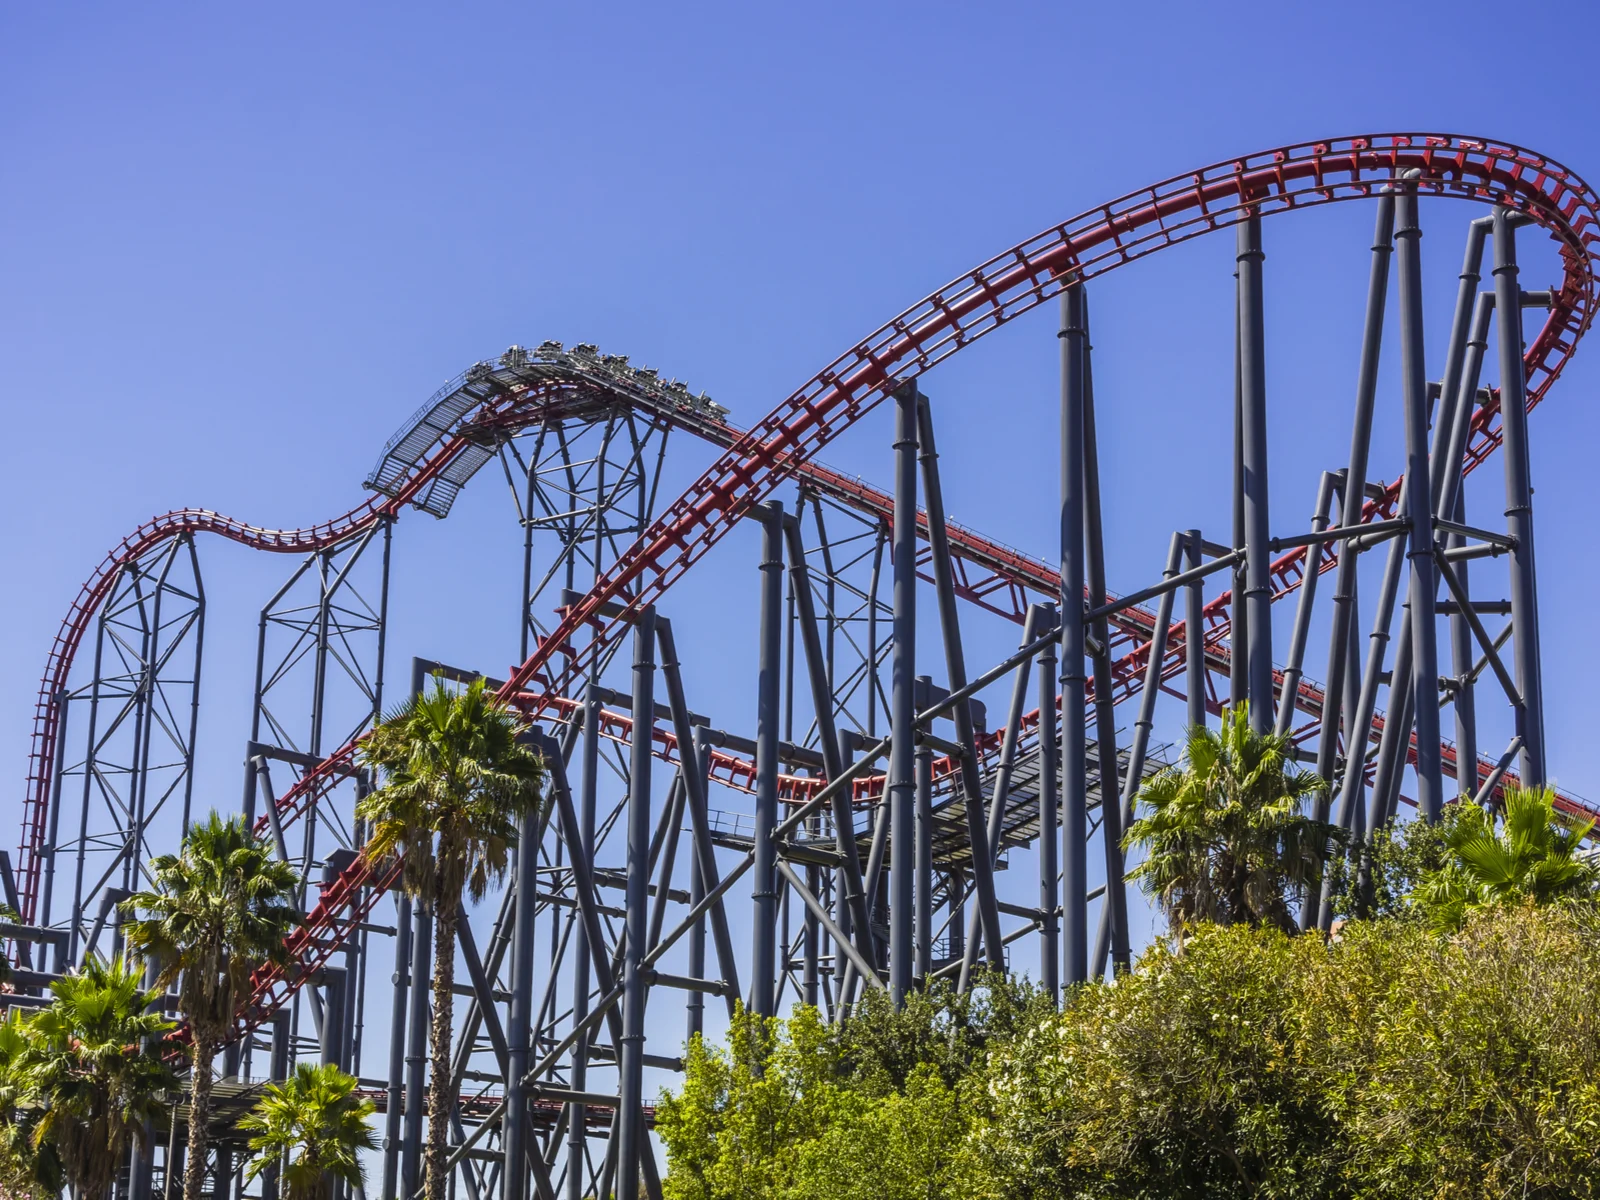 A roller coaster ride at the peak of its sophisticated rails at Six Flags Magic Mountain in Valencia, California, one of the best roller coaster parks in the US